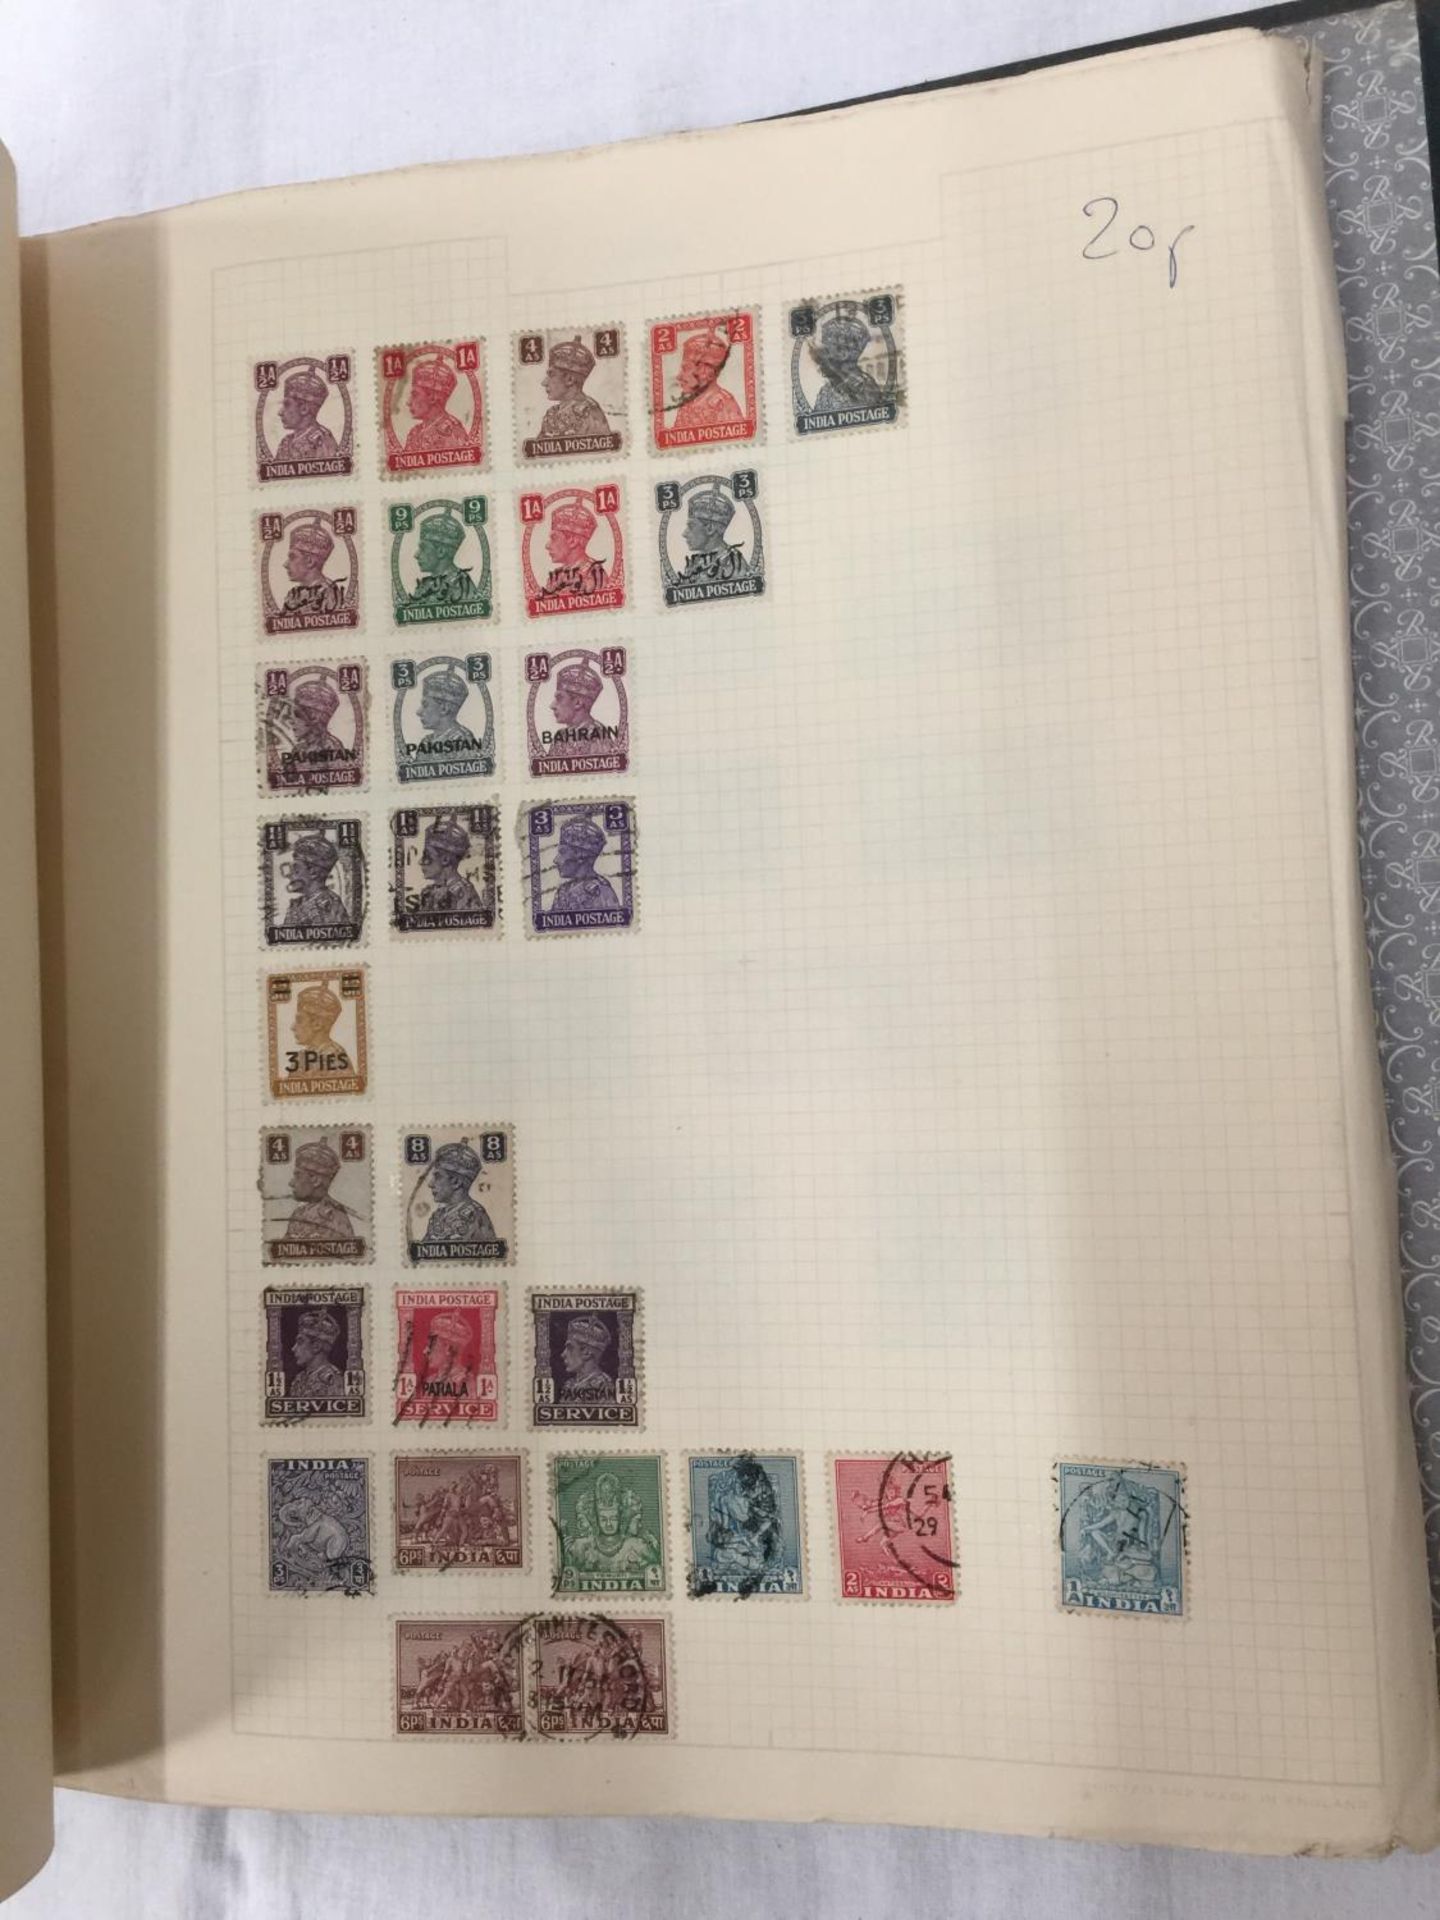 A COLLECTION OF BRITISH COMMONWEALTH STAMPS IN TWO VOLUMES FROM CANADA TO ZANZIBAR - Image 5 of 6